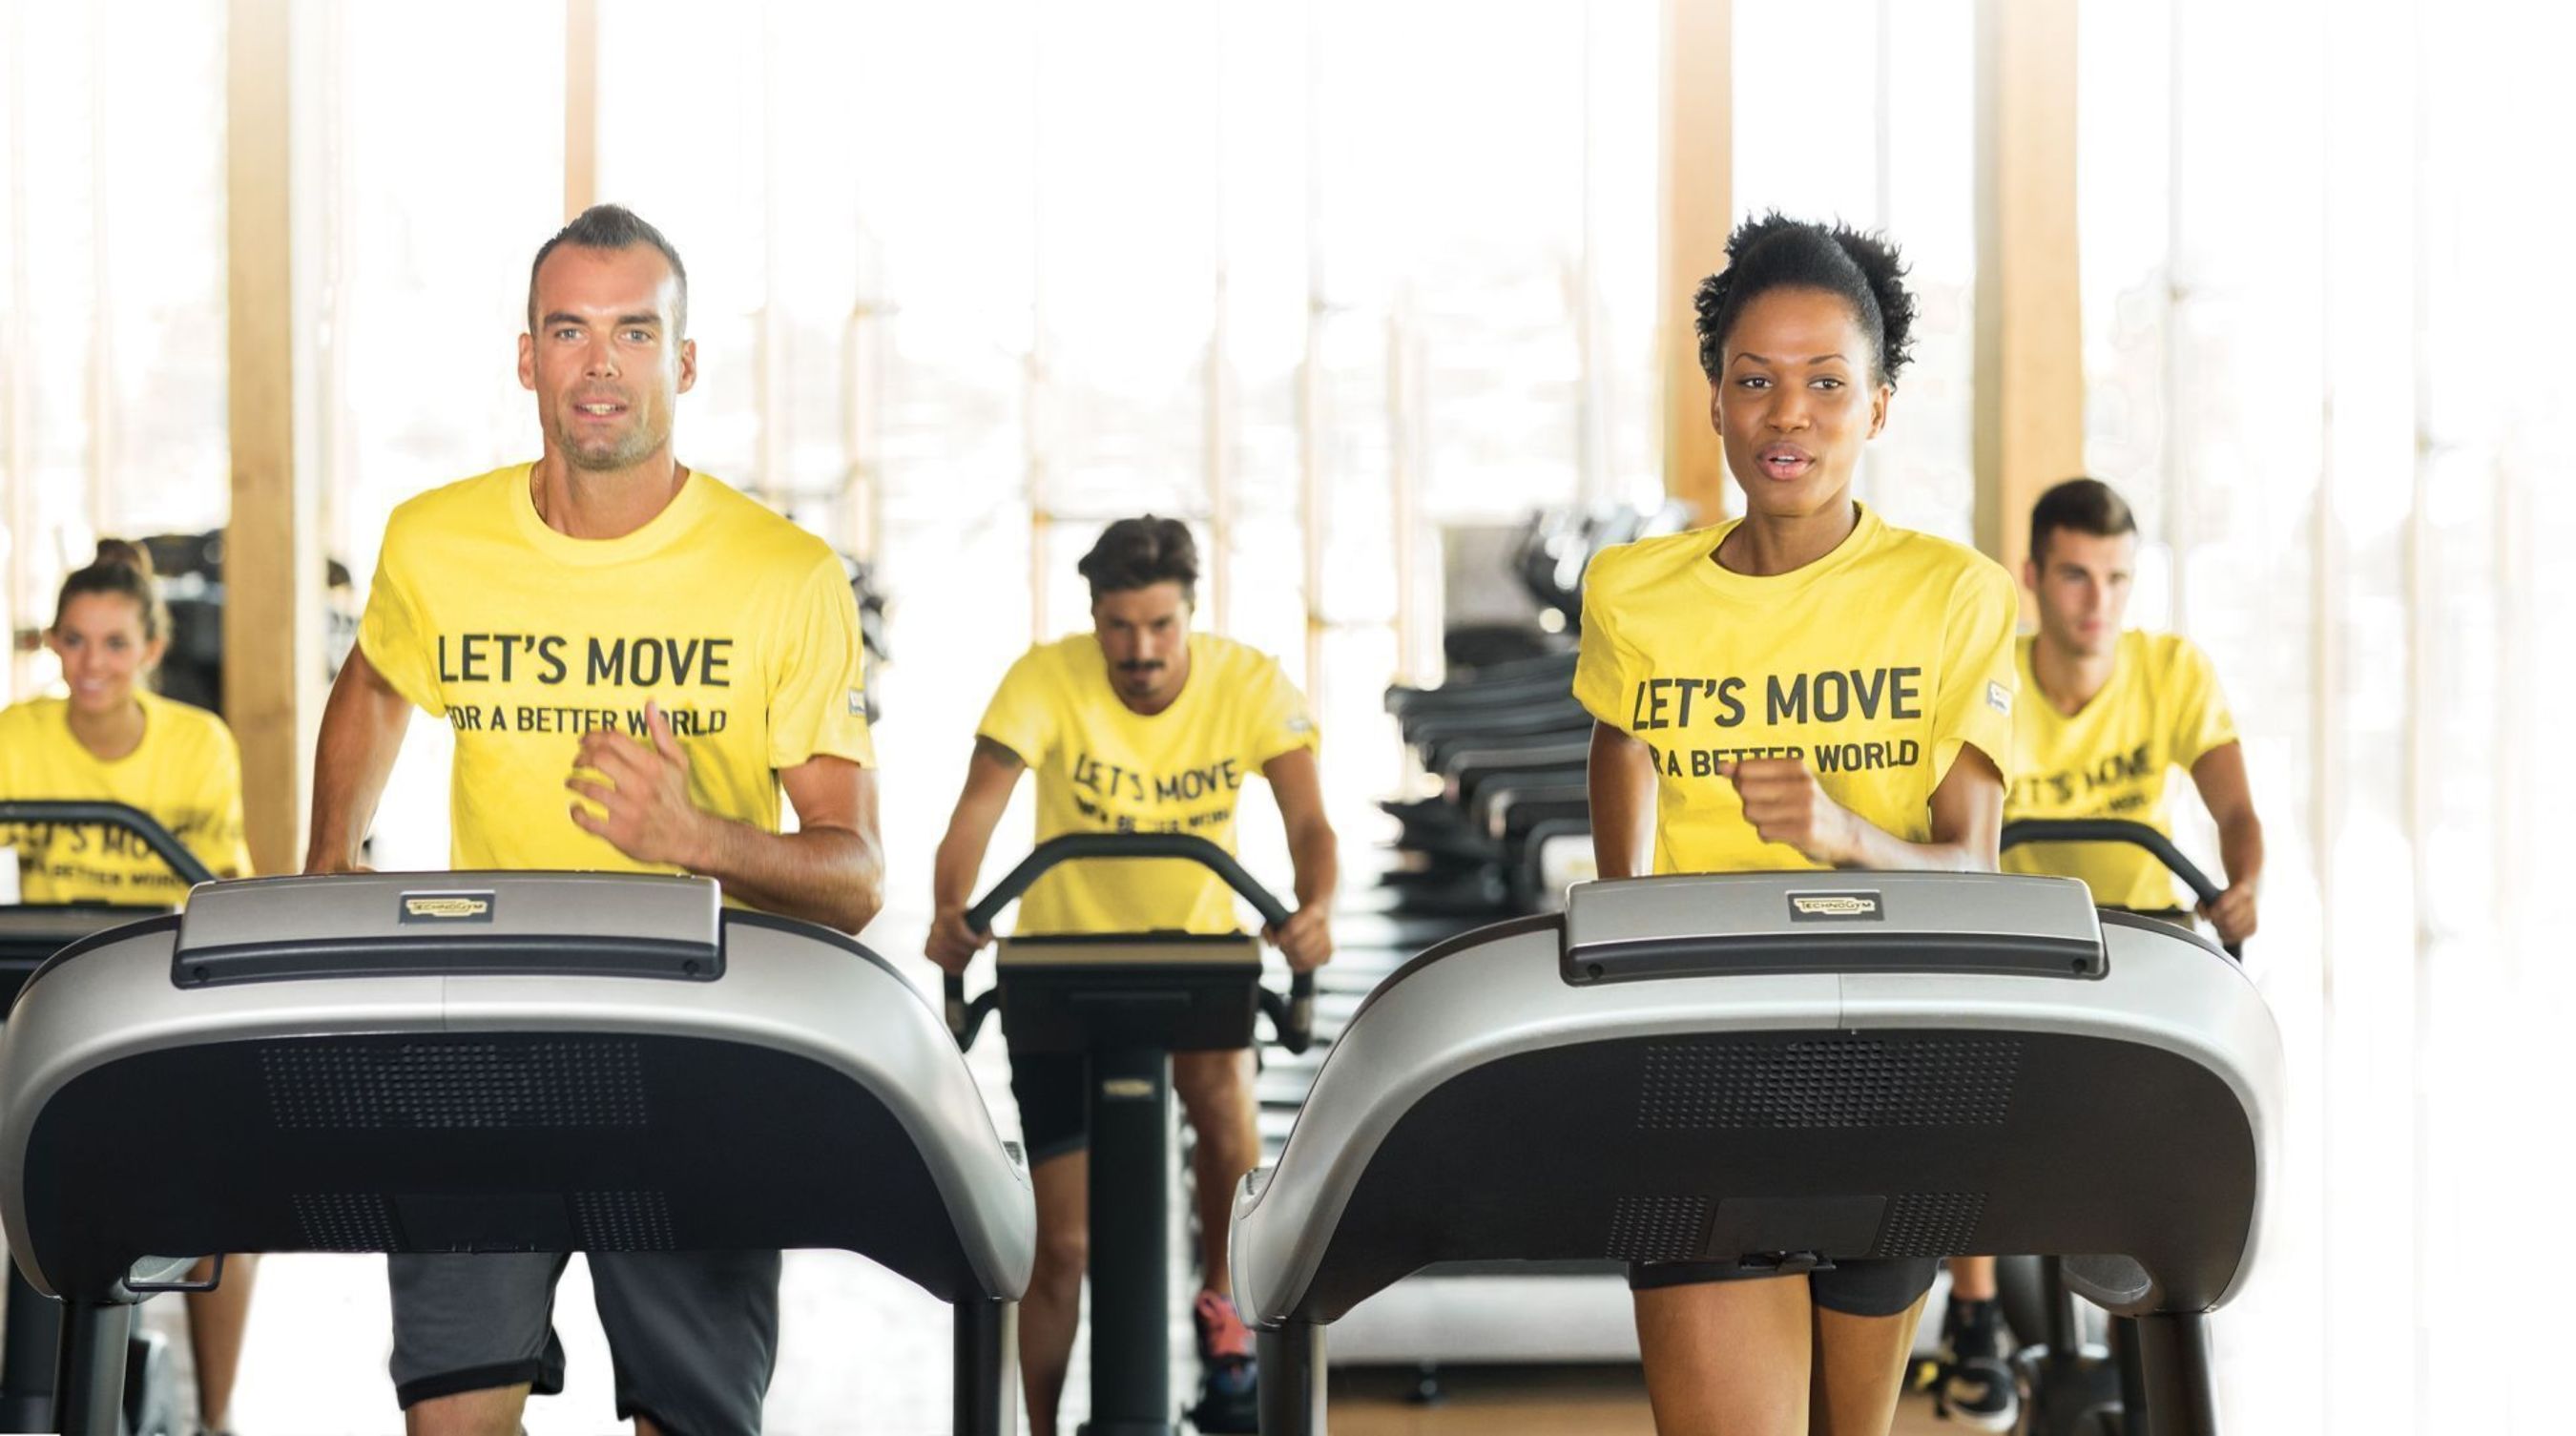 Technogym has been selected as "Official Wellness Partner" at the 2015 Milan Expo and it will launch the "Let's Move for a Better World" social campaign that enables you to convert physical exercise into school meals for countries affected by malnutrition in collaboration with the United Nations World Food Programme (PRNewsFoto/Technogym Spa)